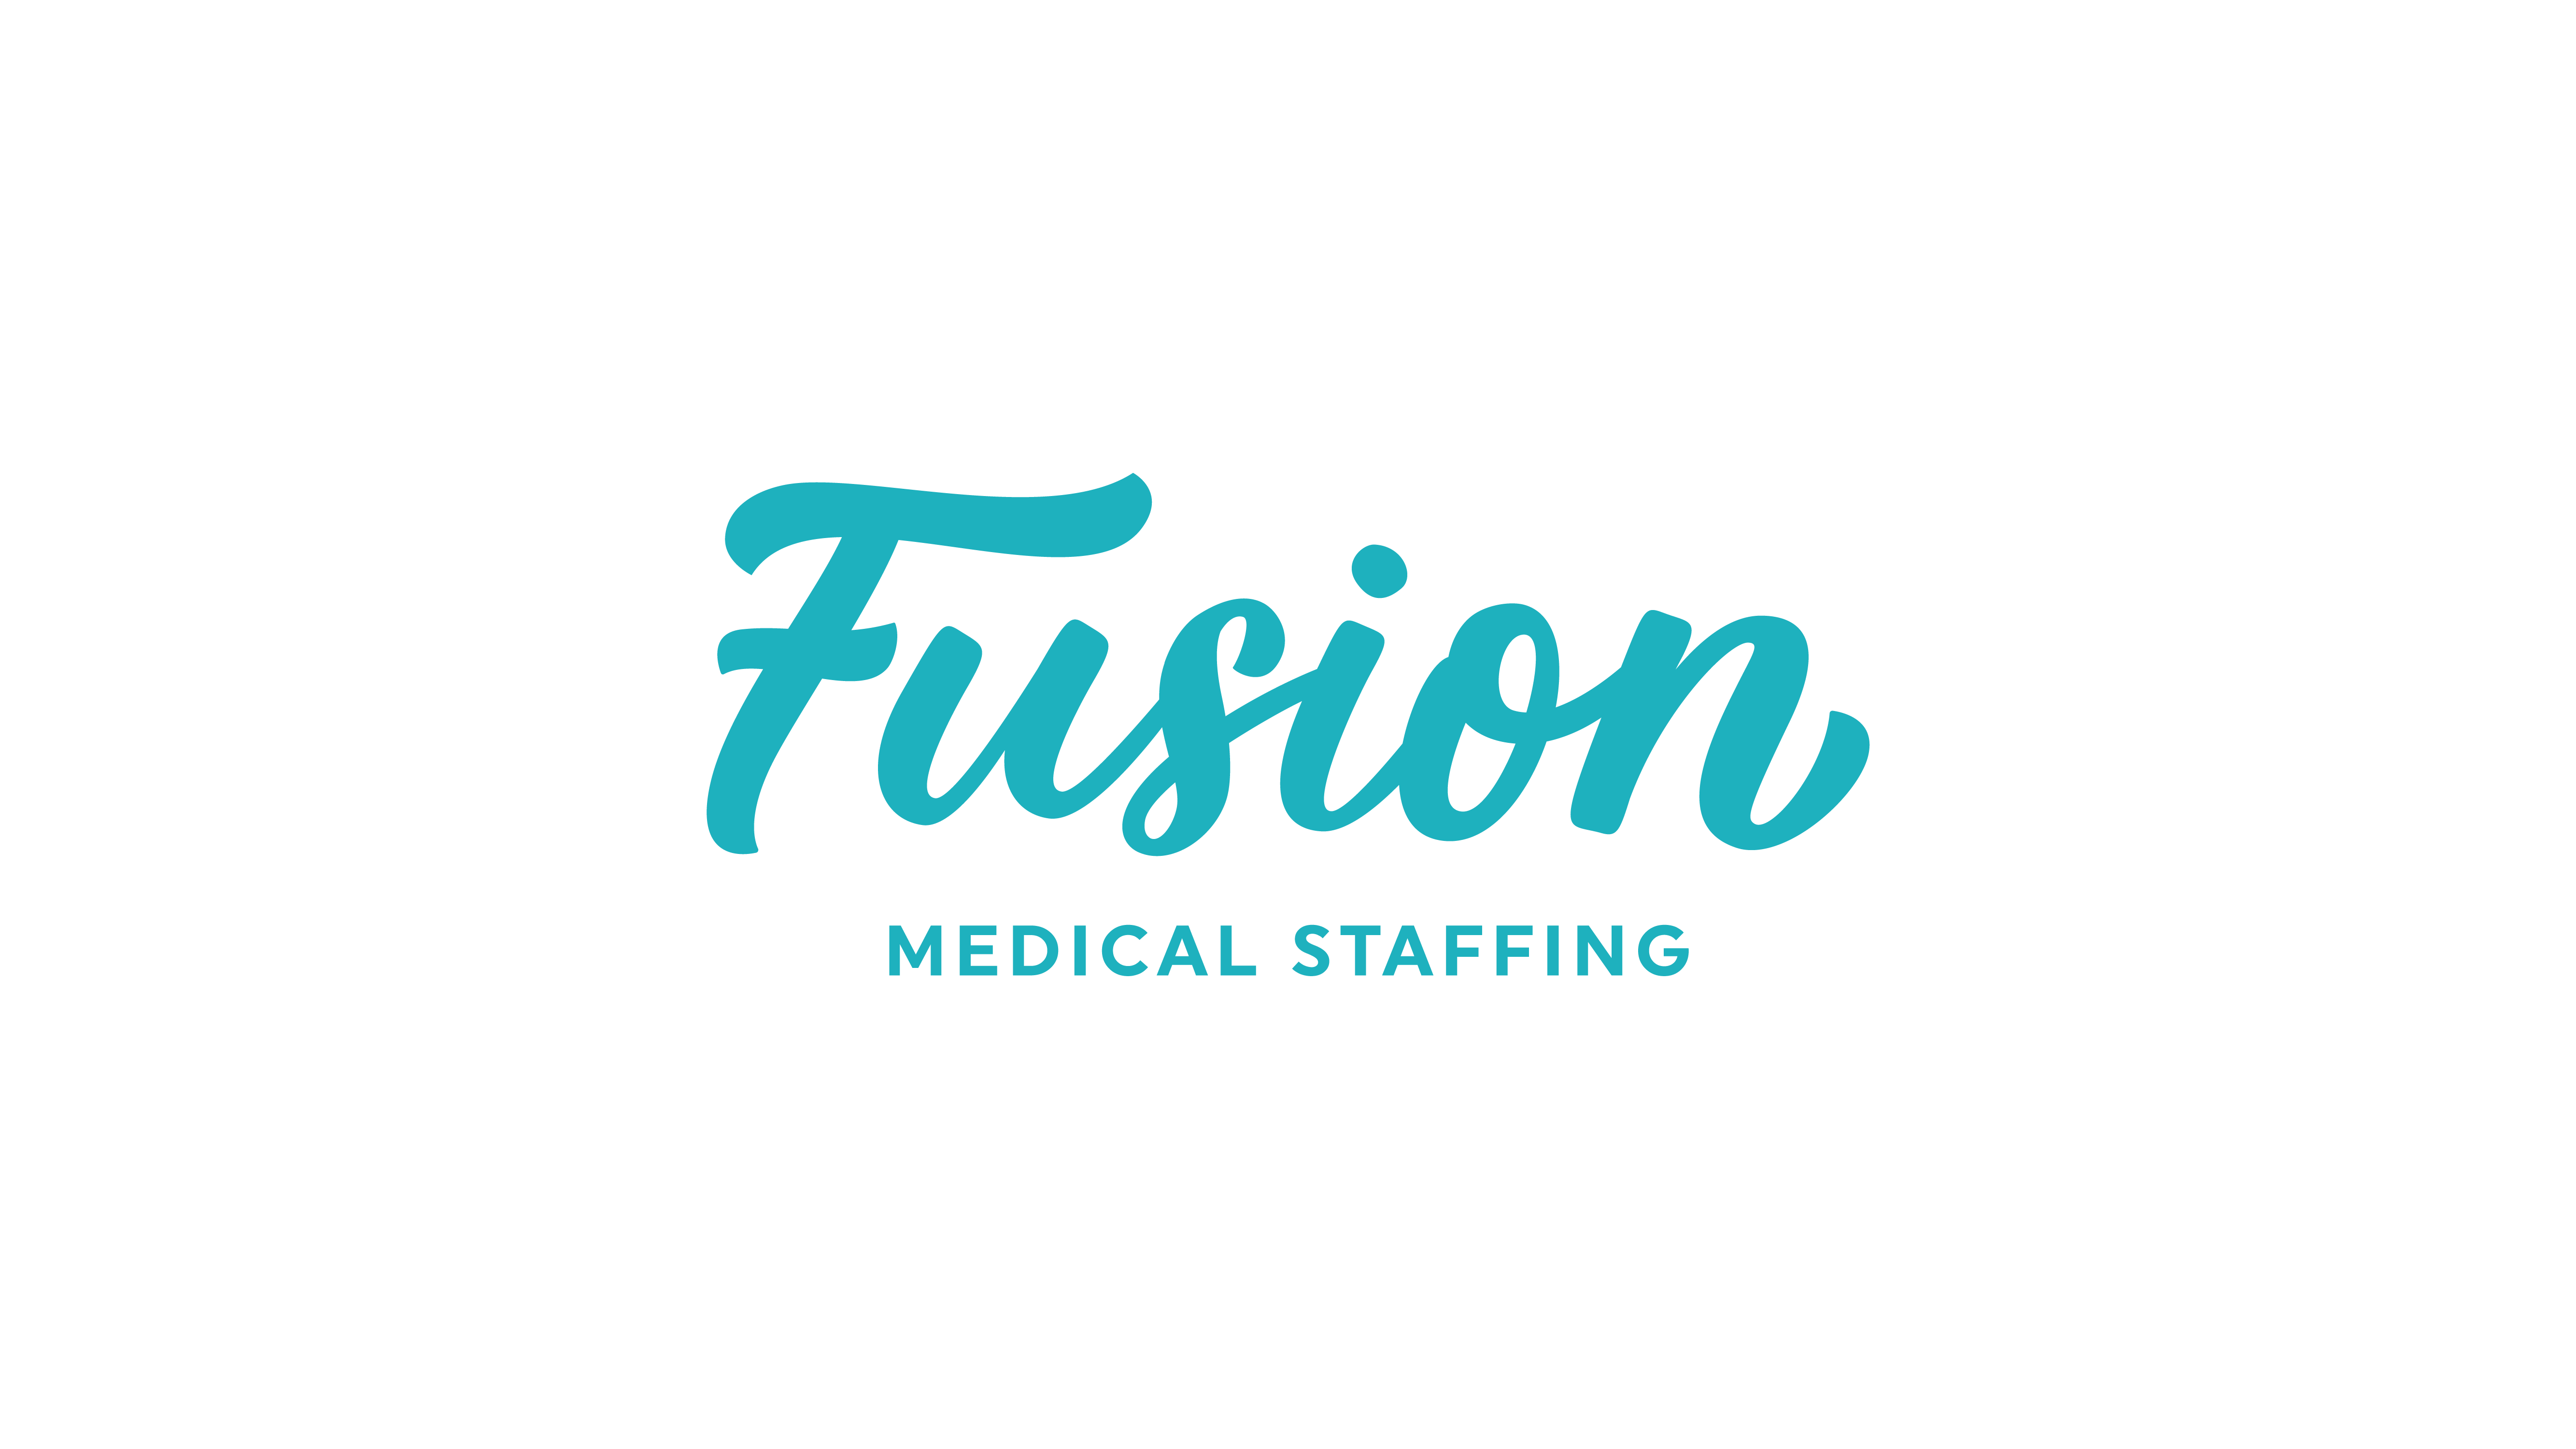 Fusion Medical Staffing Makes Sixth Appearance on Inc. 5000 List